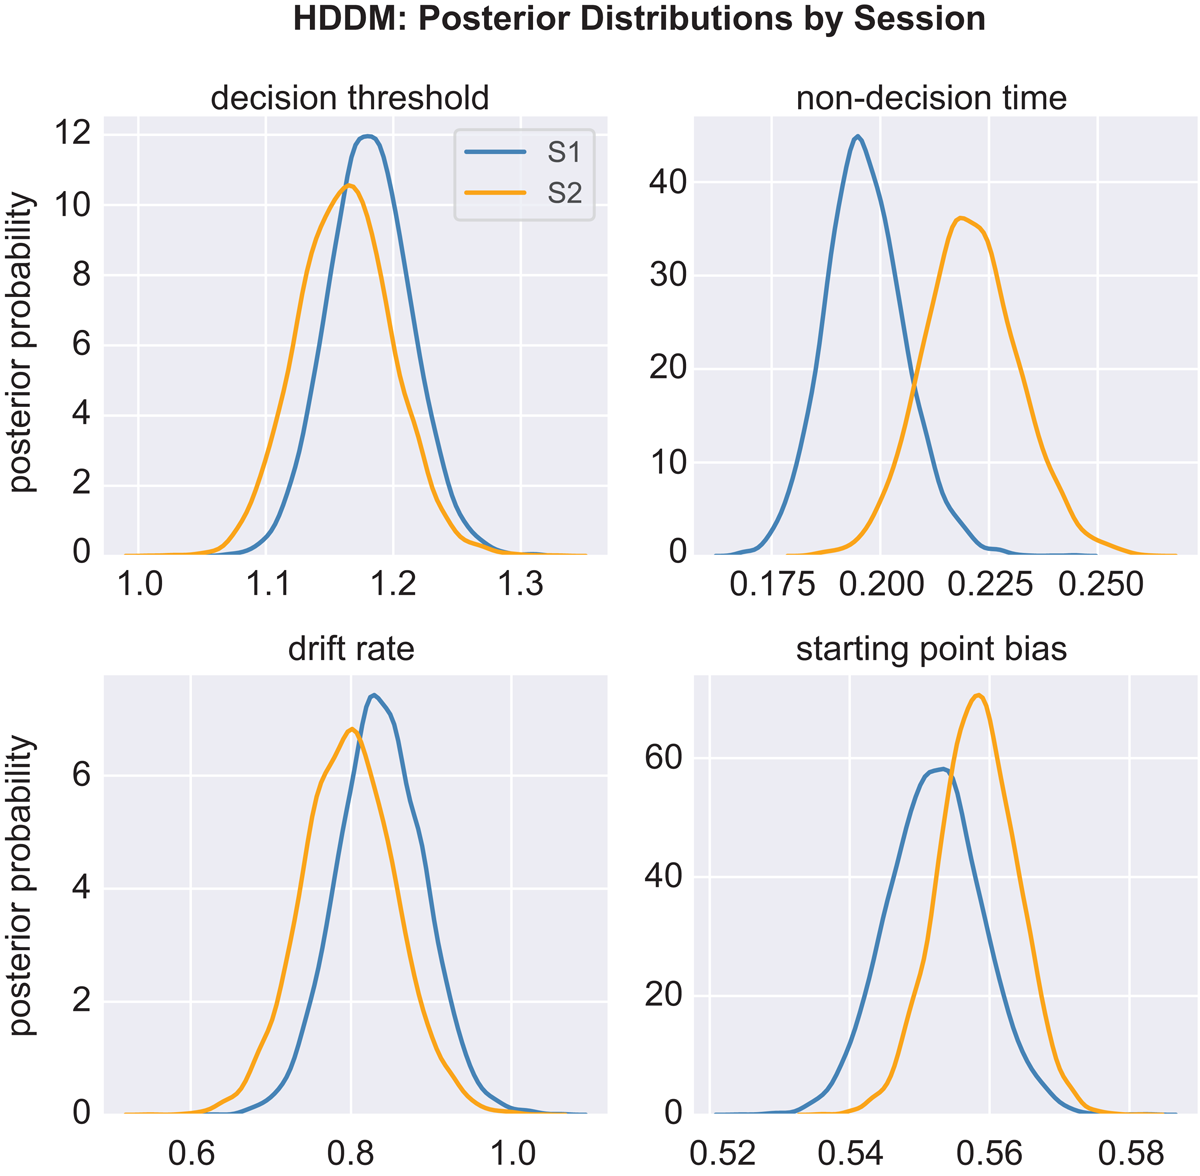 Posterior probability distributions for HDDM parameters from both sessions